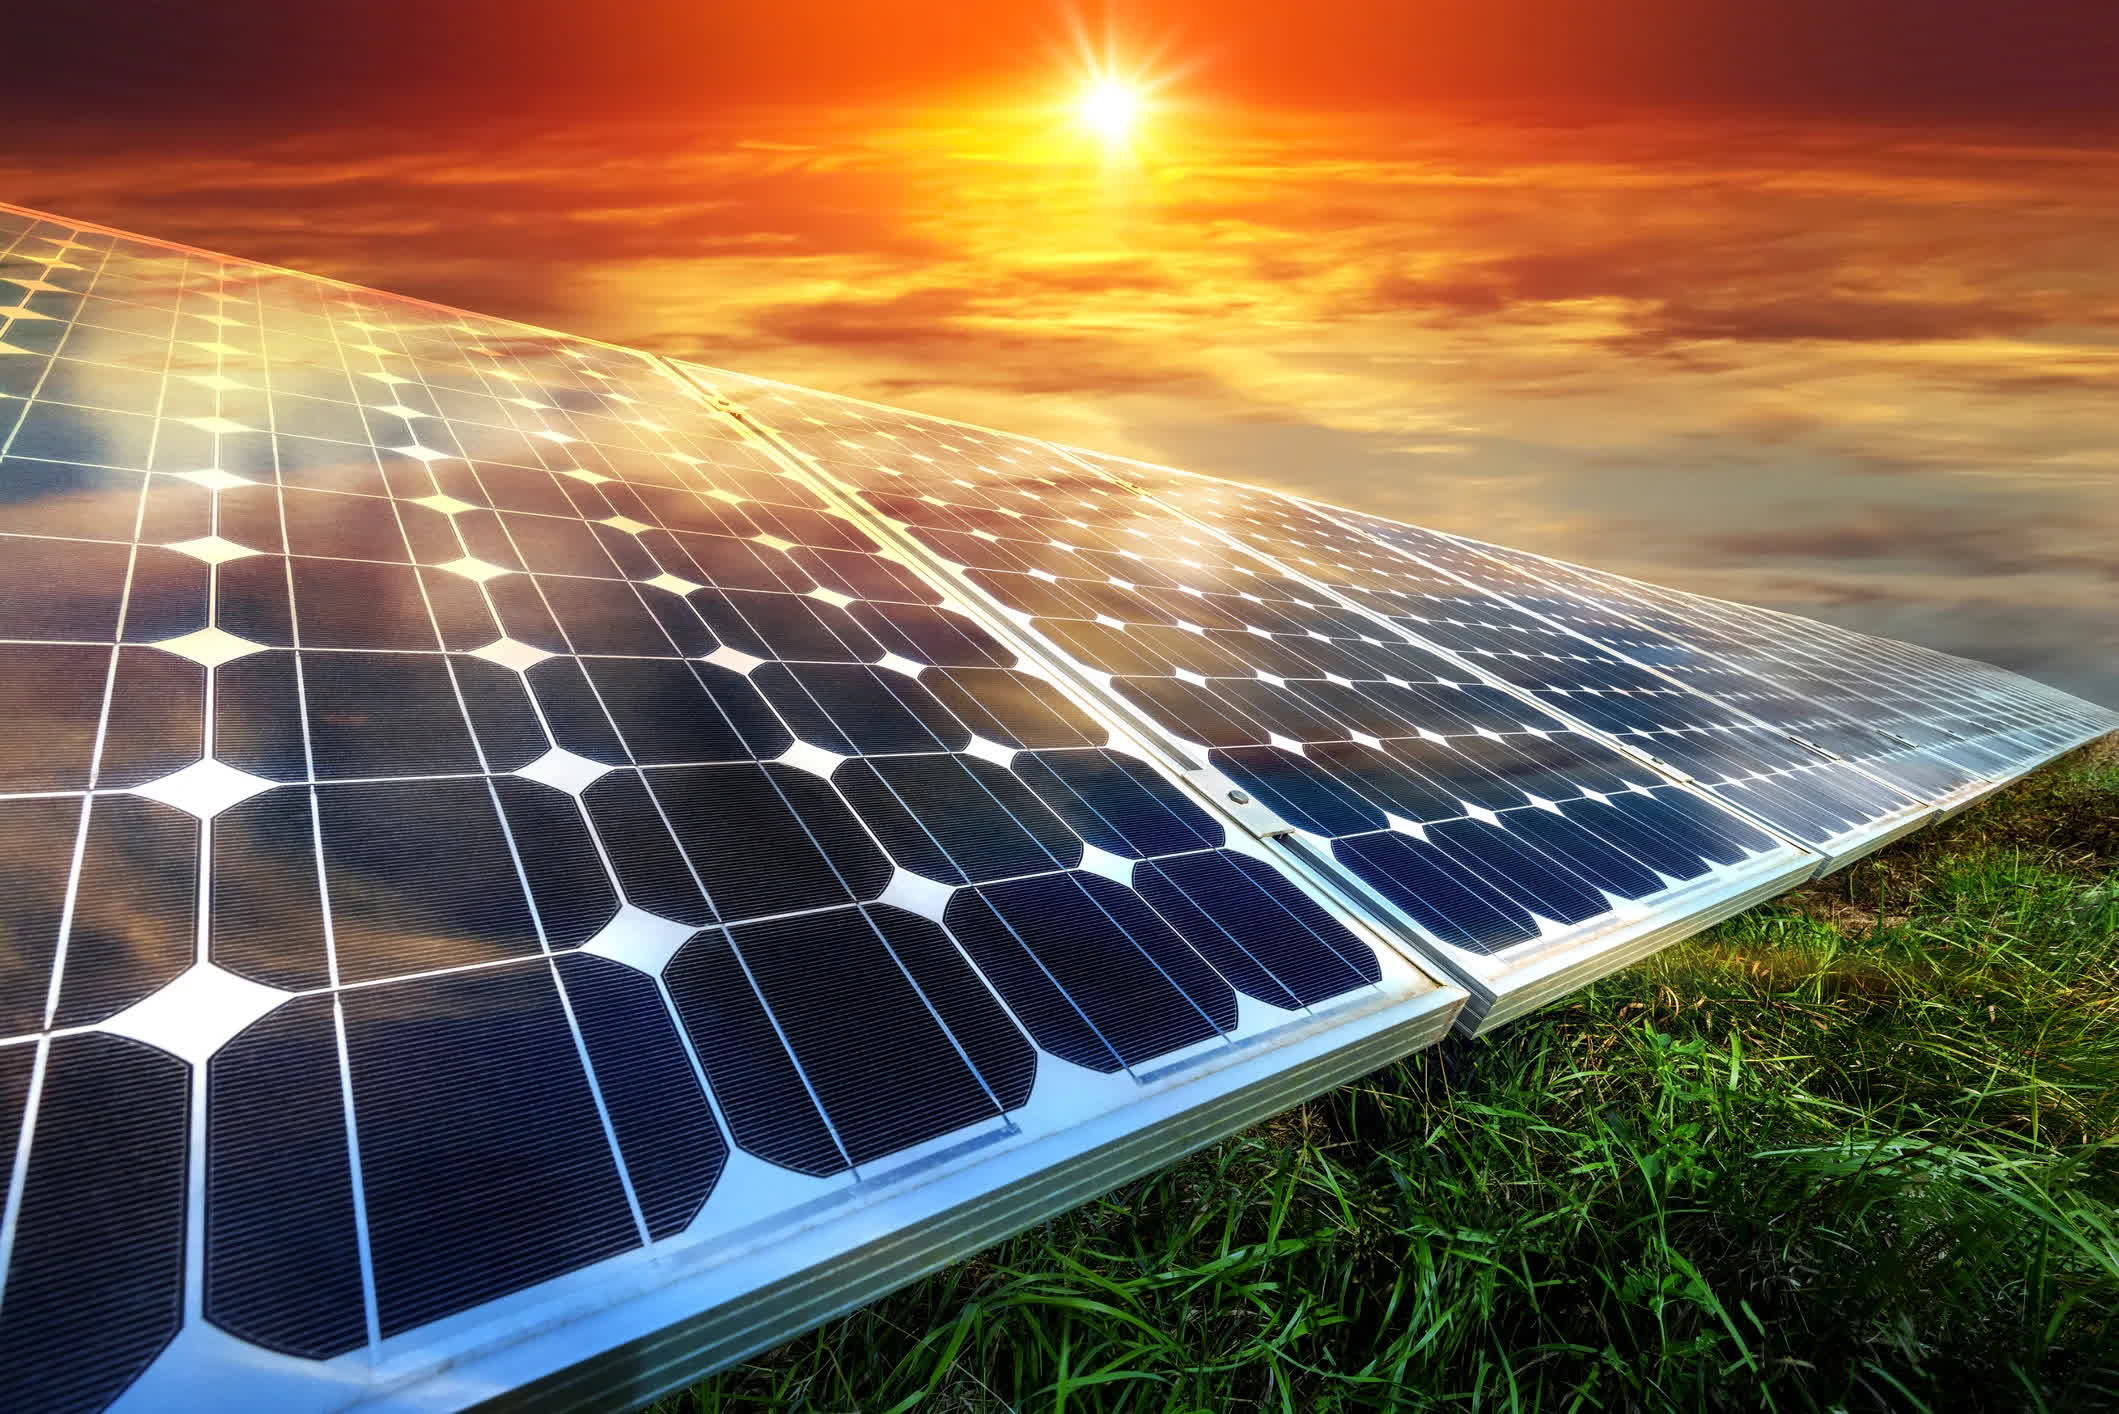 Silicon-perovskite solar cells are on the verge of revolutionizing power generation efficiency